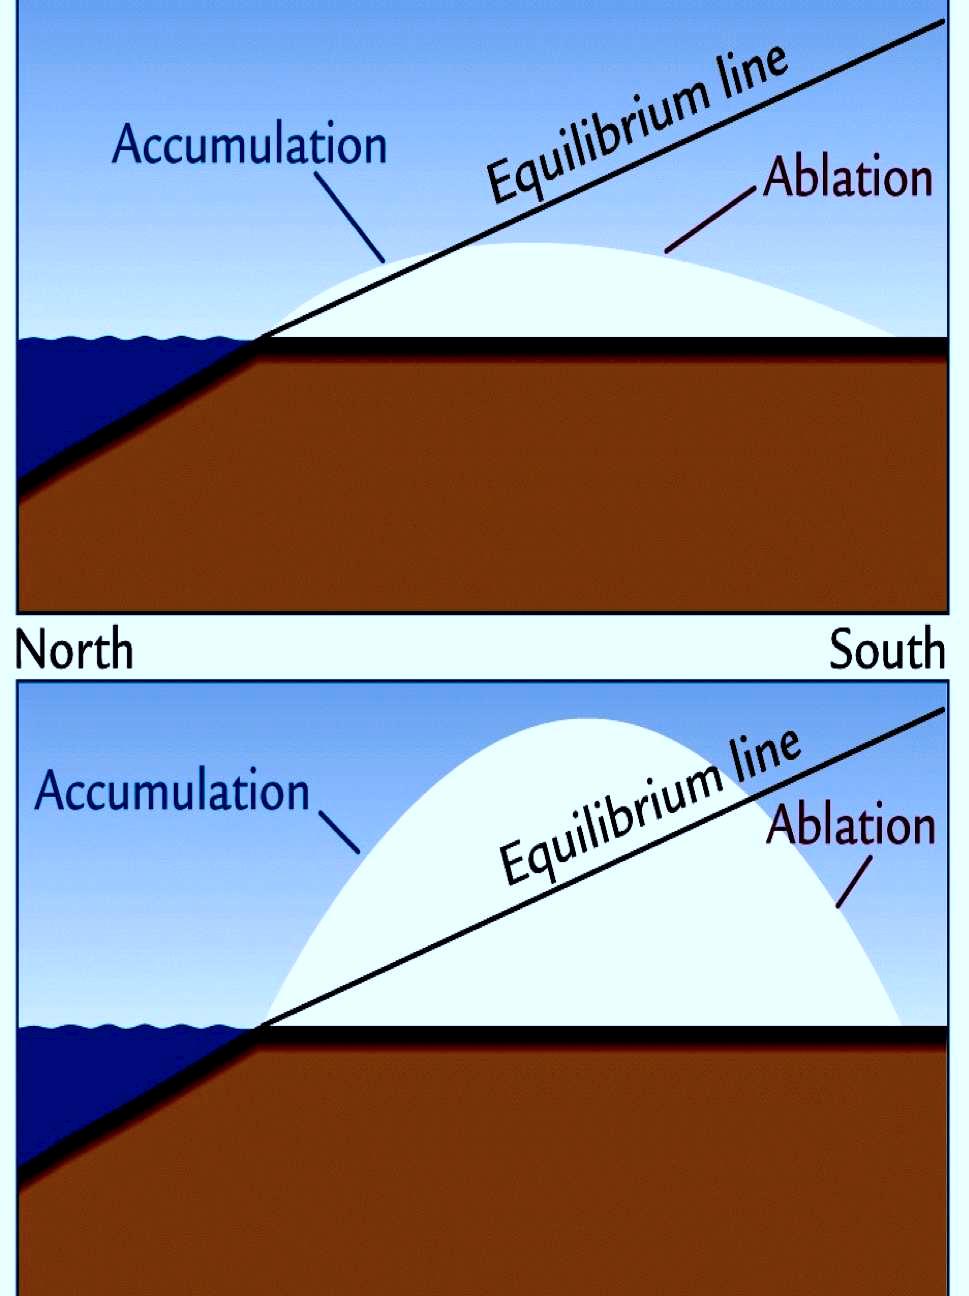 Ice Elevation Feedback As ice sheets grow vertically ELA in same location but ice moves